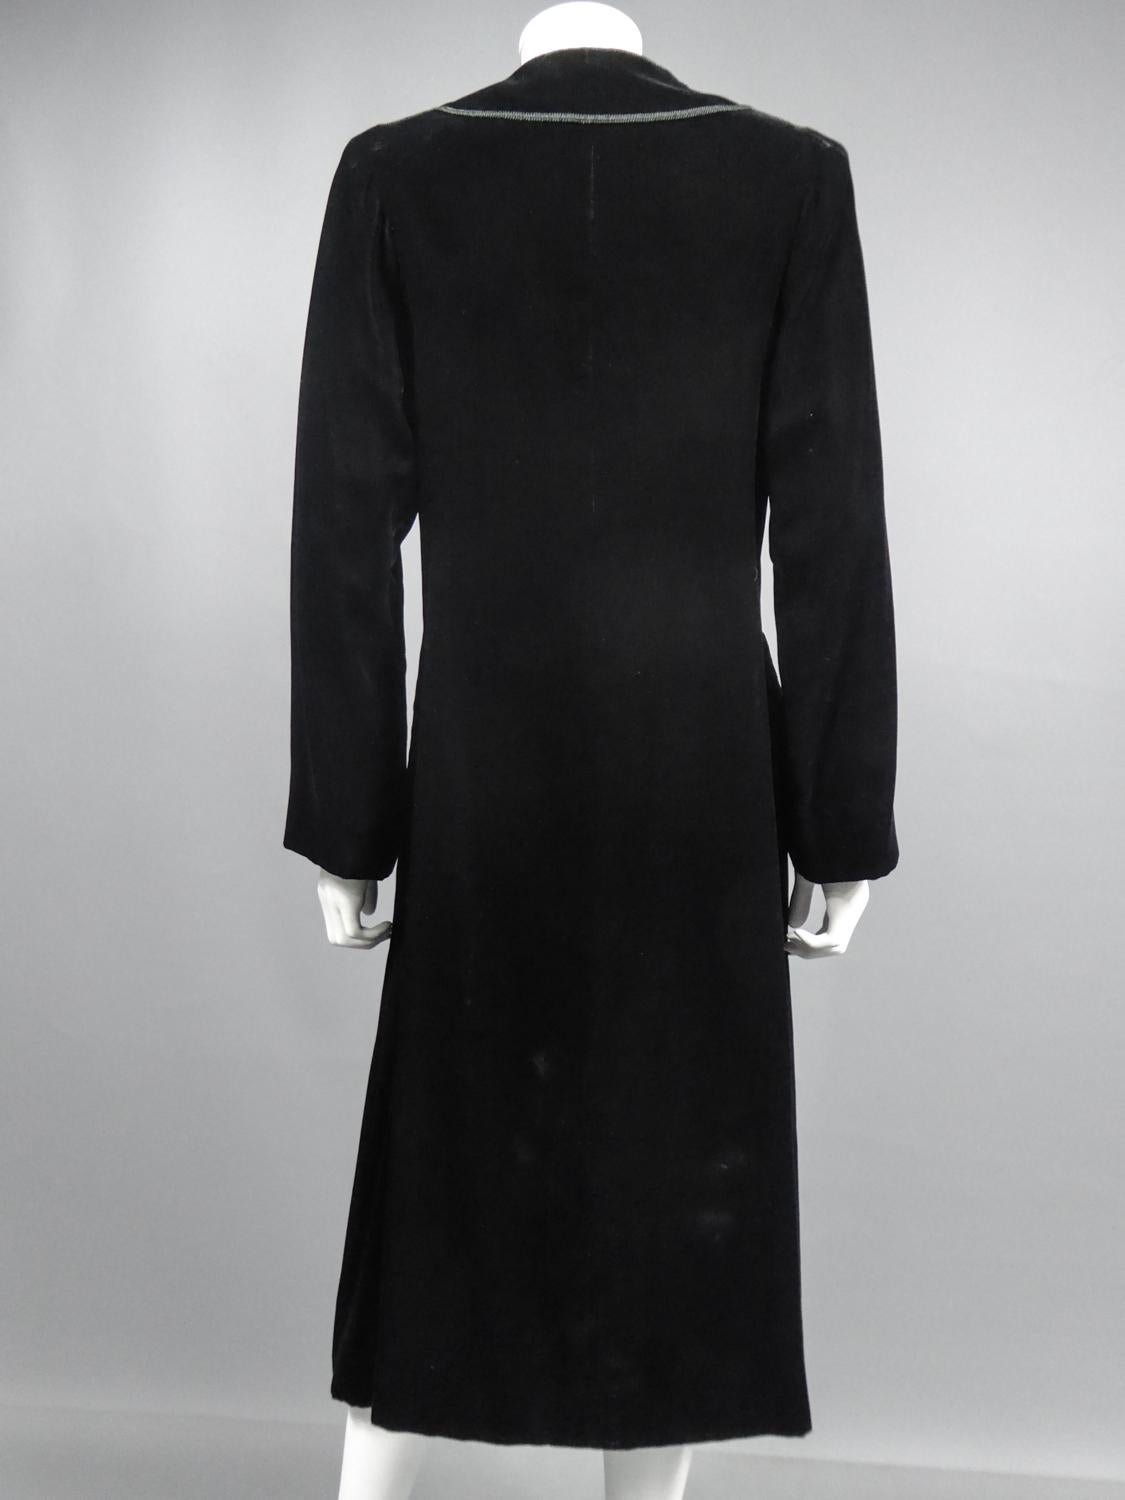 A french Couture Emanuel Ungaro Little Black Dress Number 4383-10-76 Circa 1976 For Sale 9